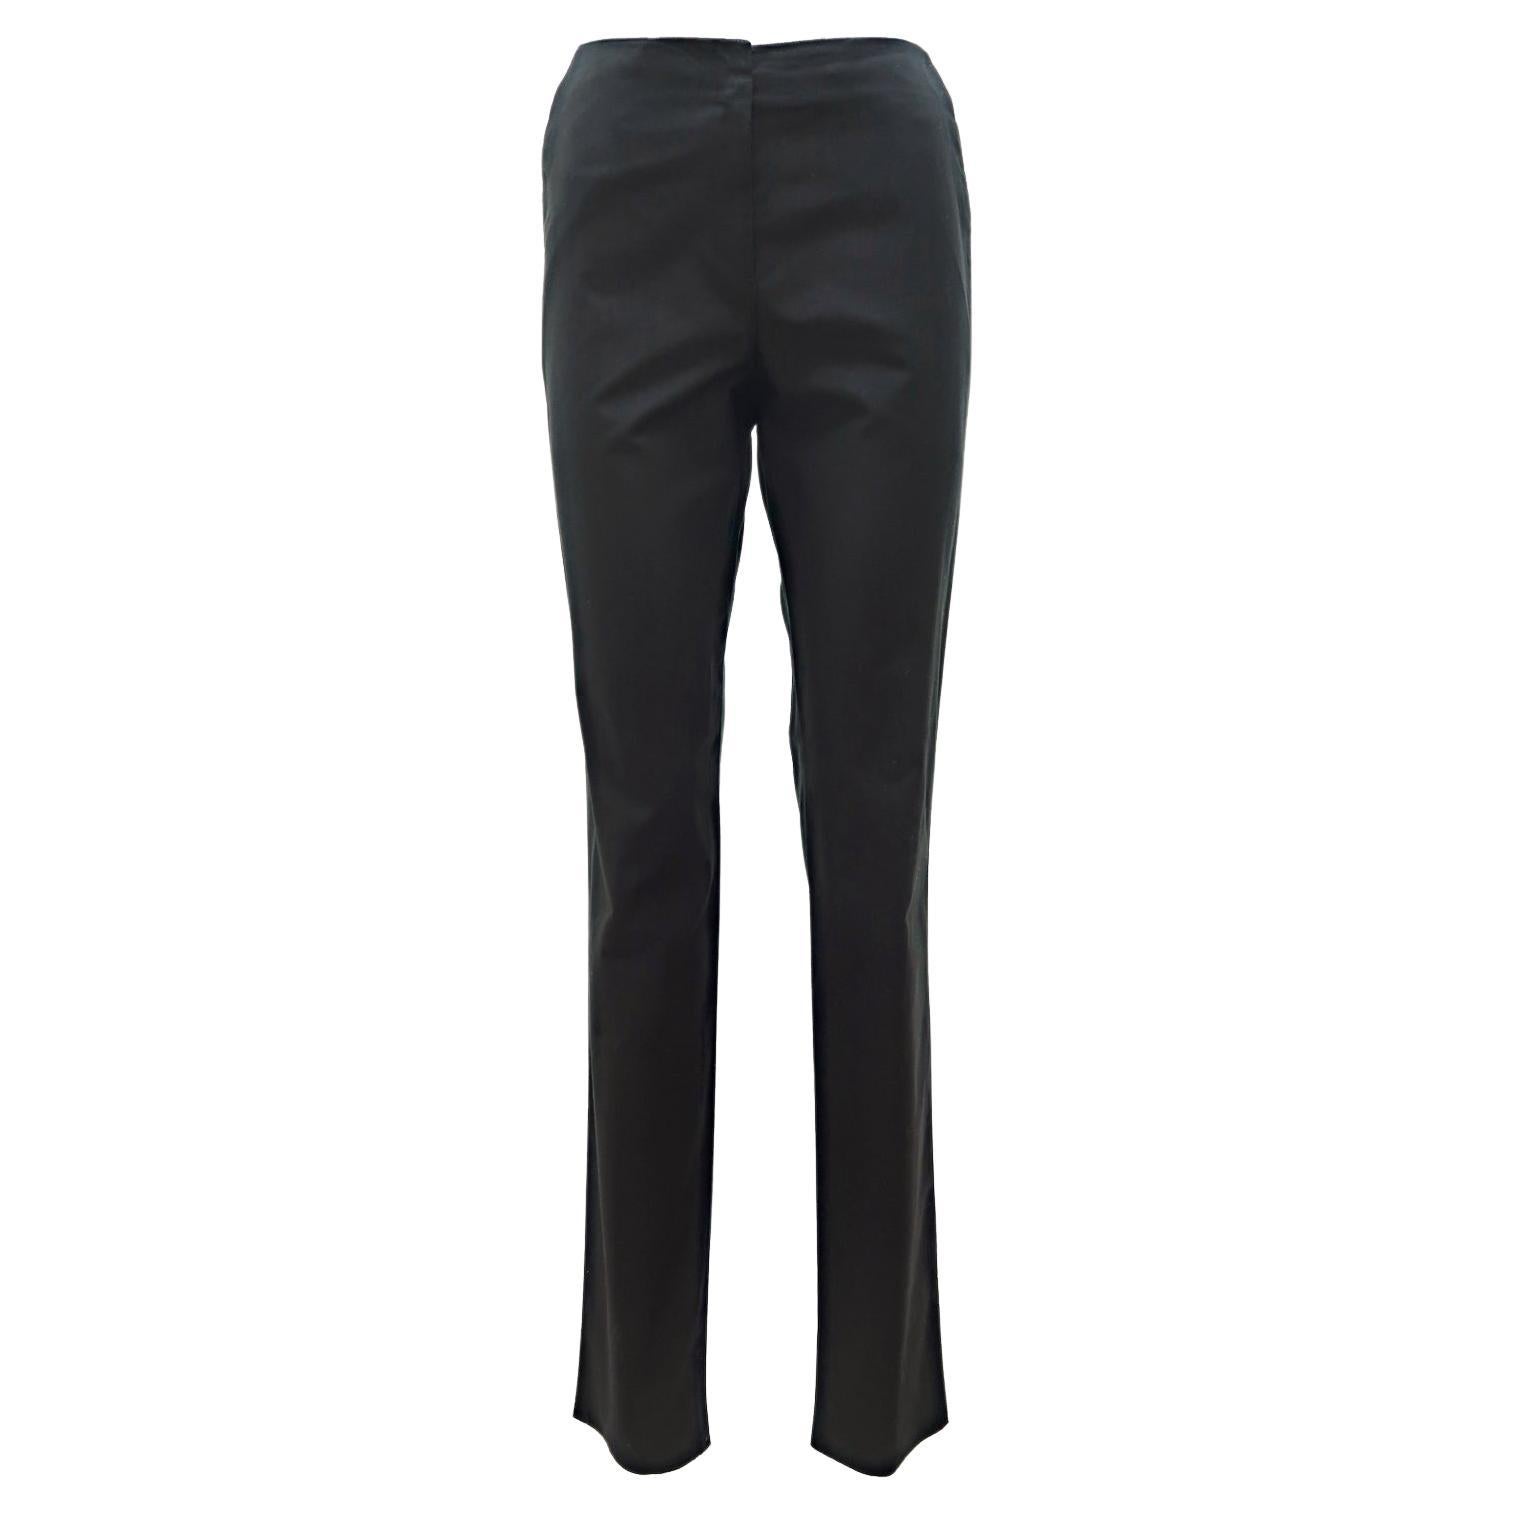 Yves Saint Laurent by Tom Ford FW-2001 Tailored Silhouette Cotton Pants For Sale